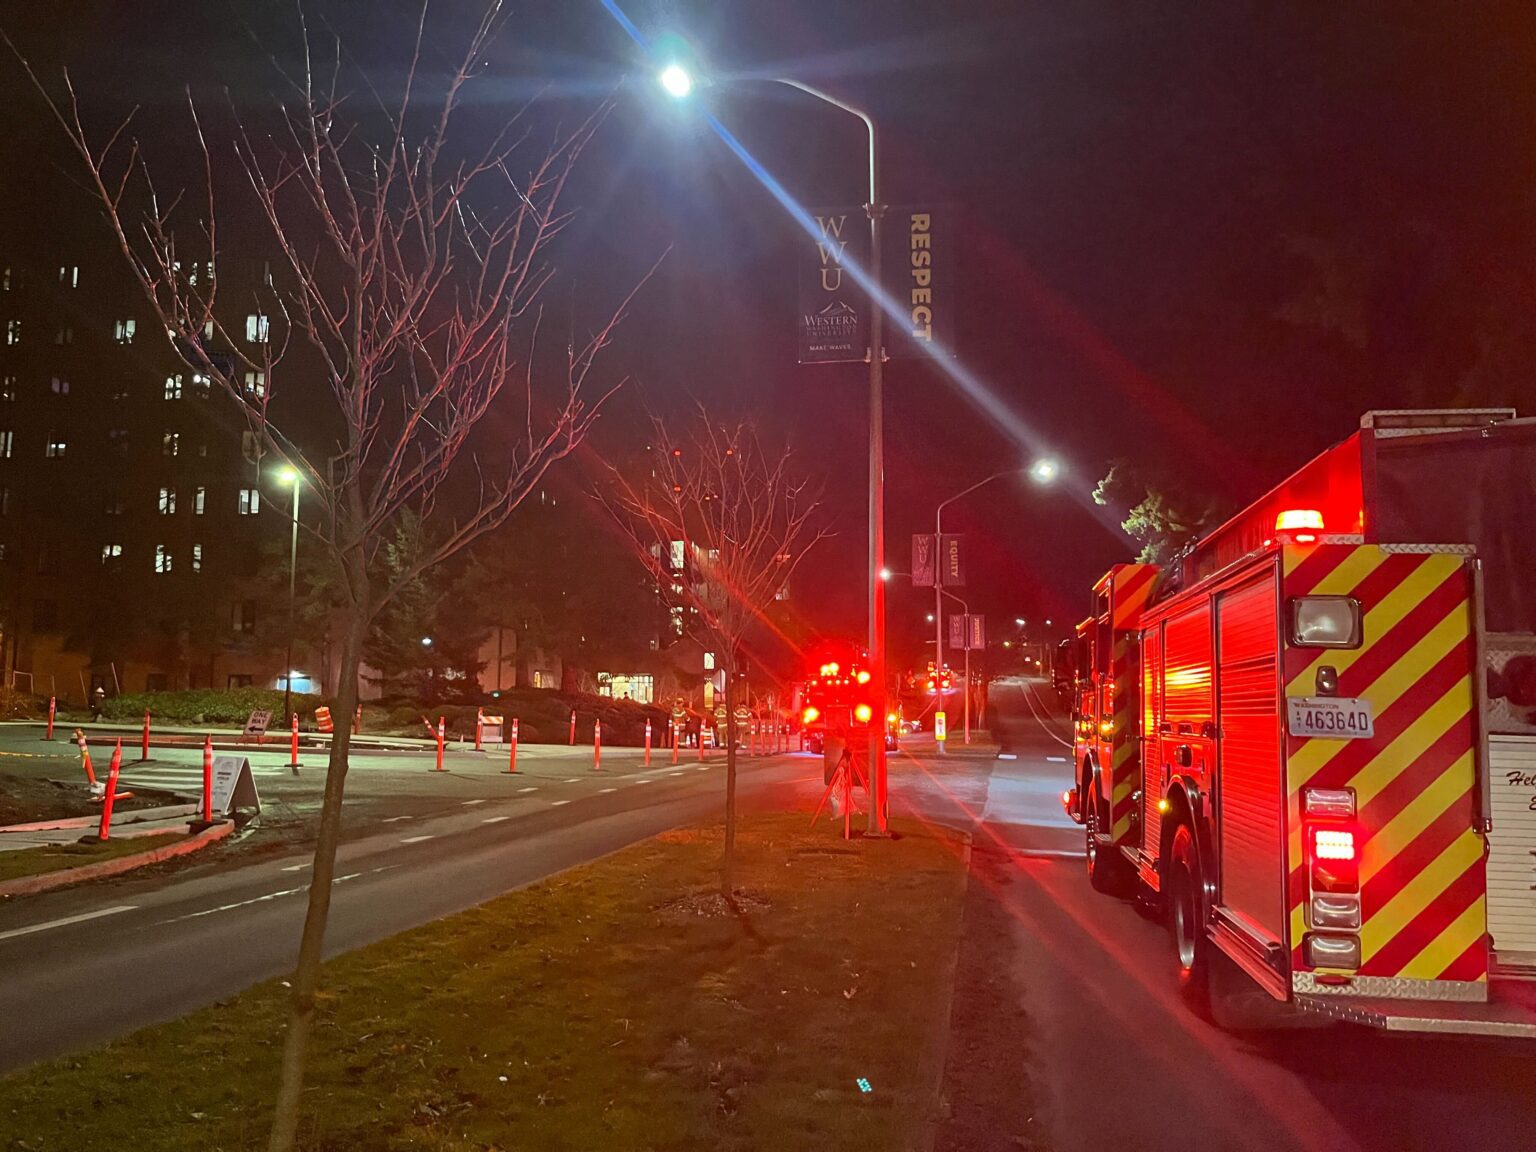 Bellingham Fire Department responded to a small fire on an outdoor stairwell at Buchanan Tower on Western Washington University's campus Jan. 19.